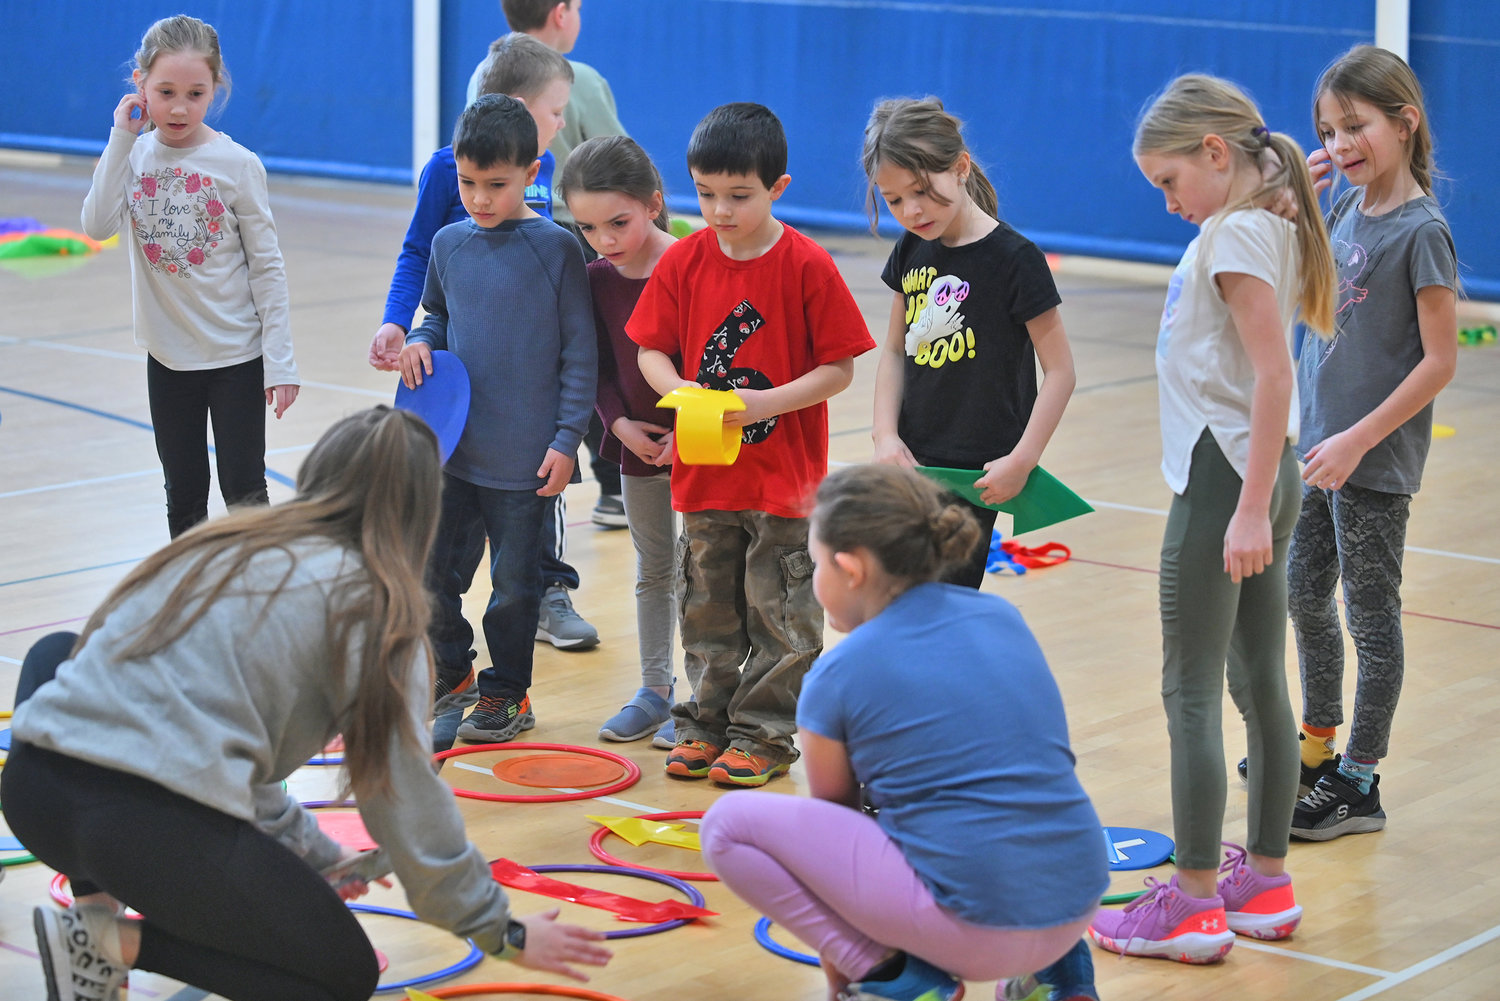 Homeschooled children play and learn during Home Zone gym classes Wednesday, Feb. 8 at the YMCA in Oneida.